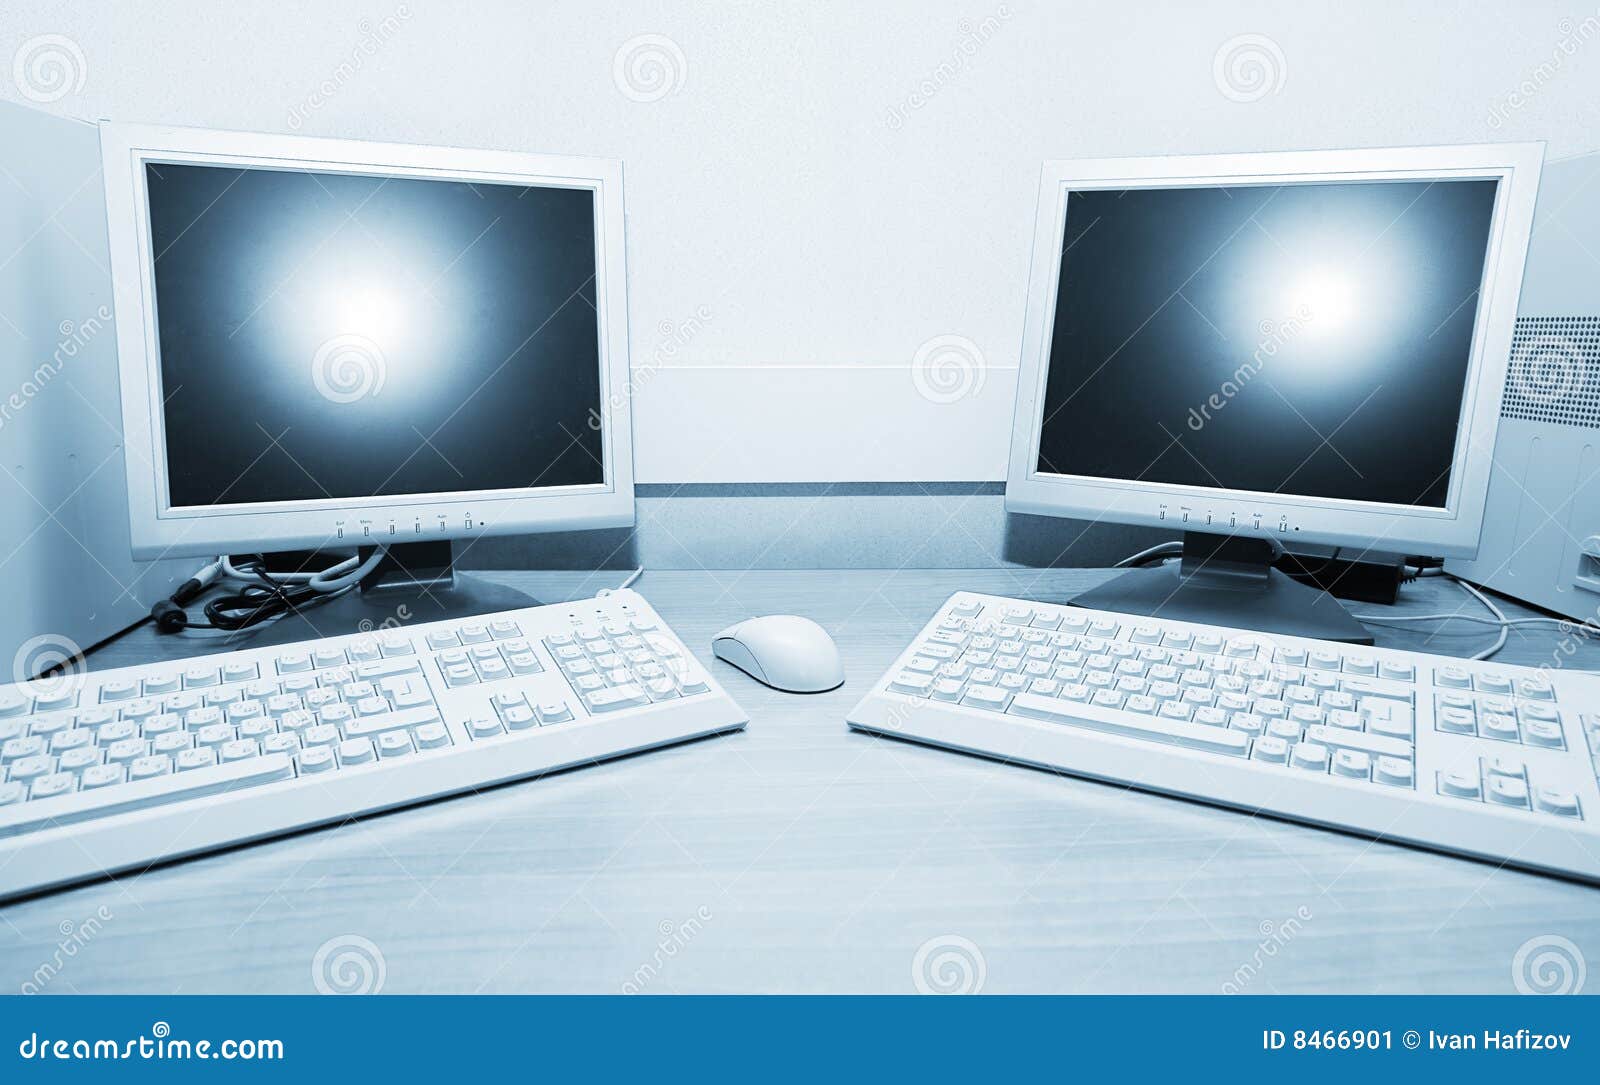 two computers